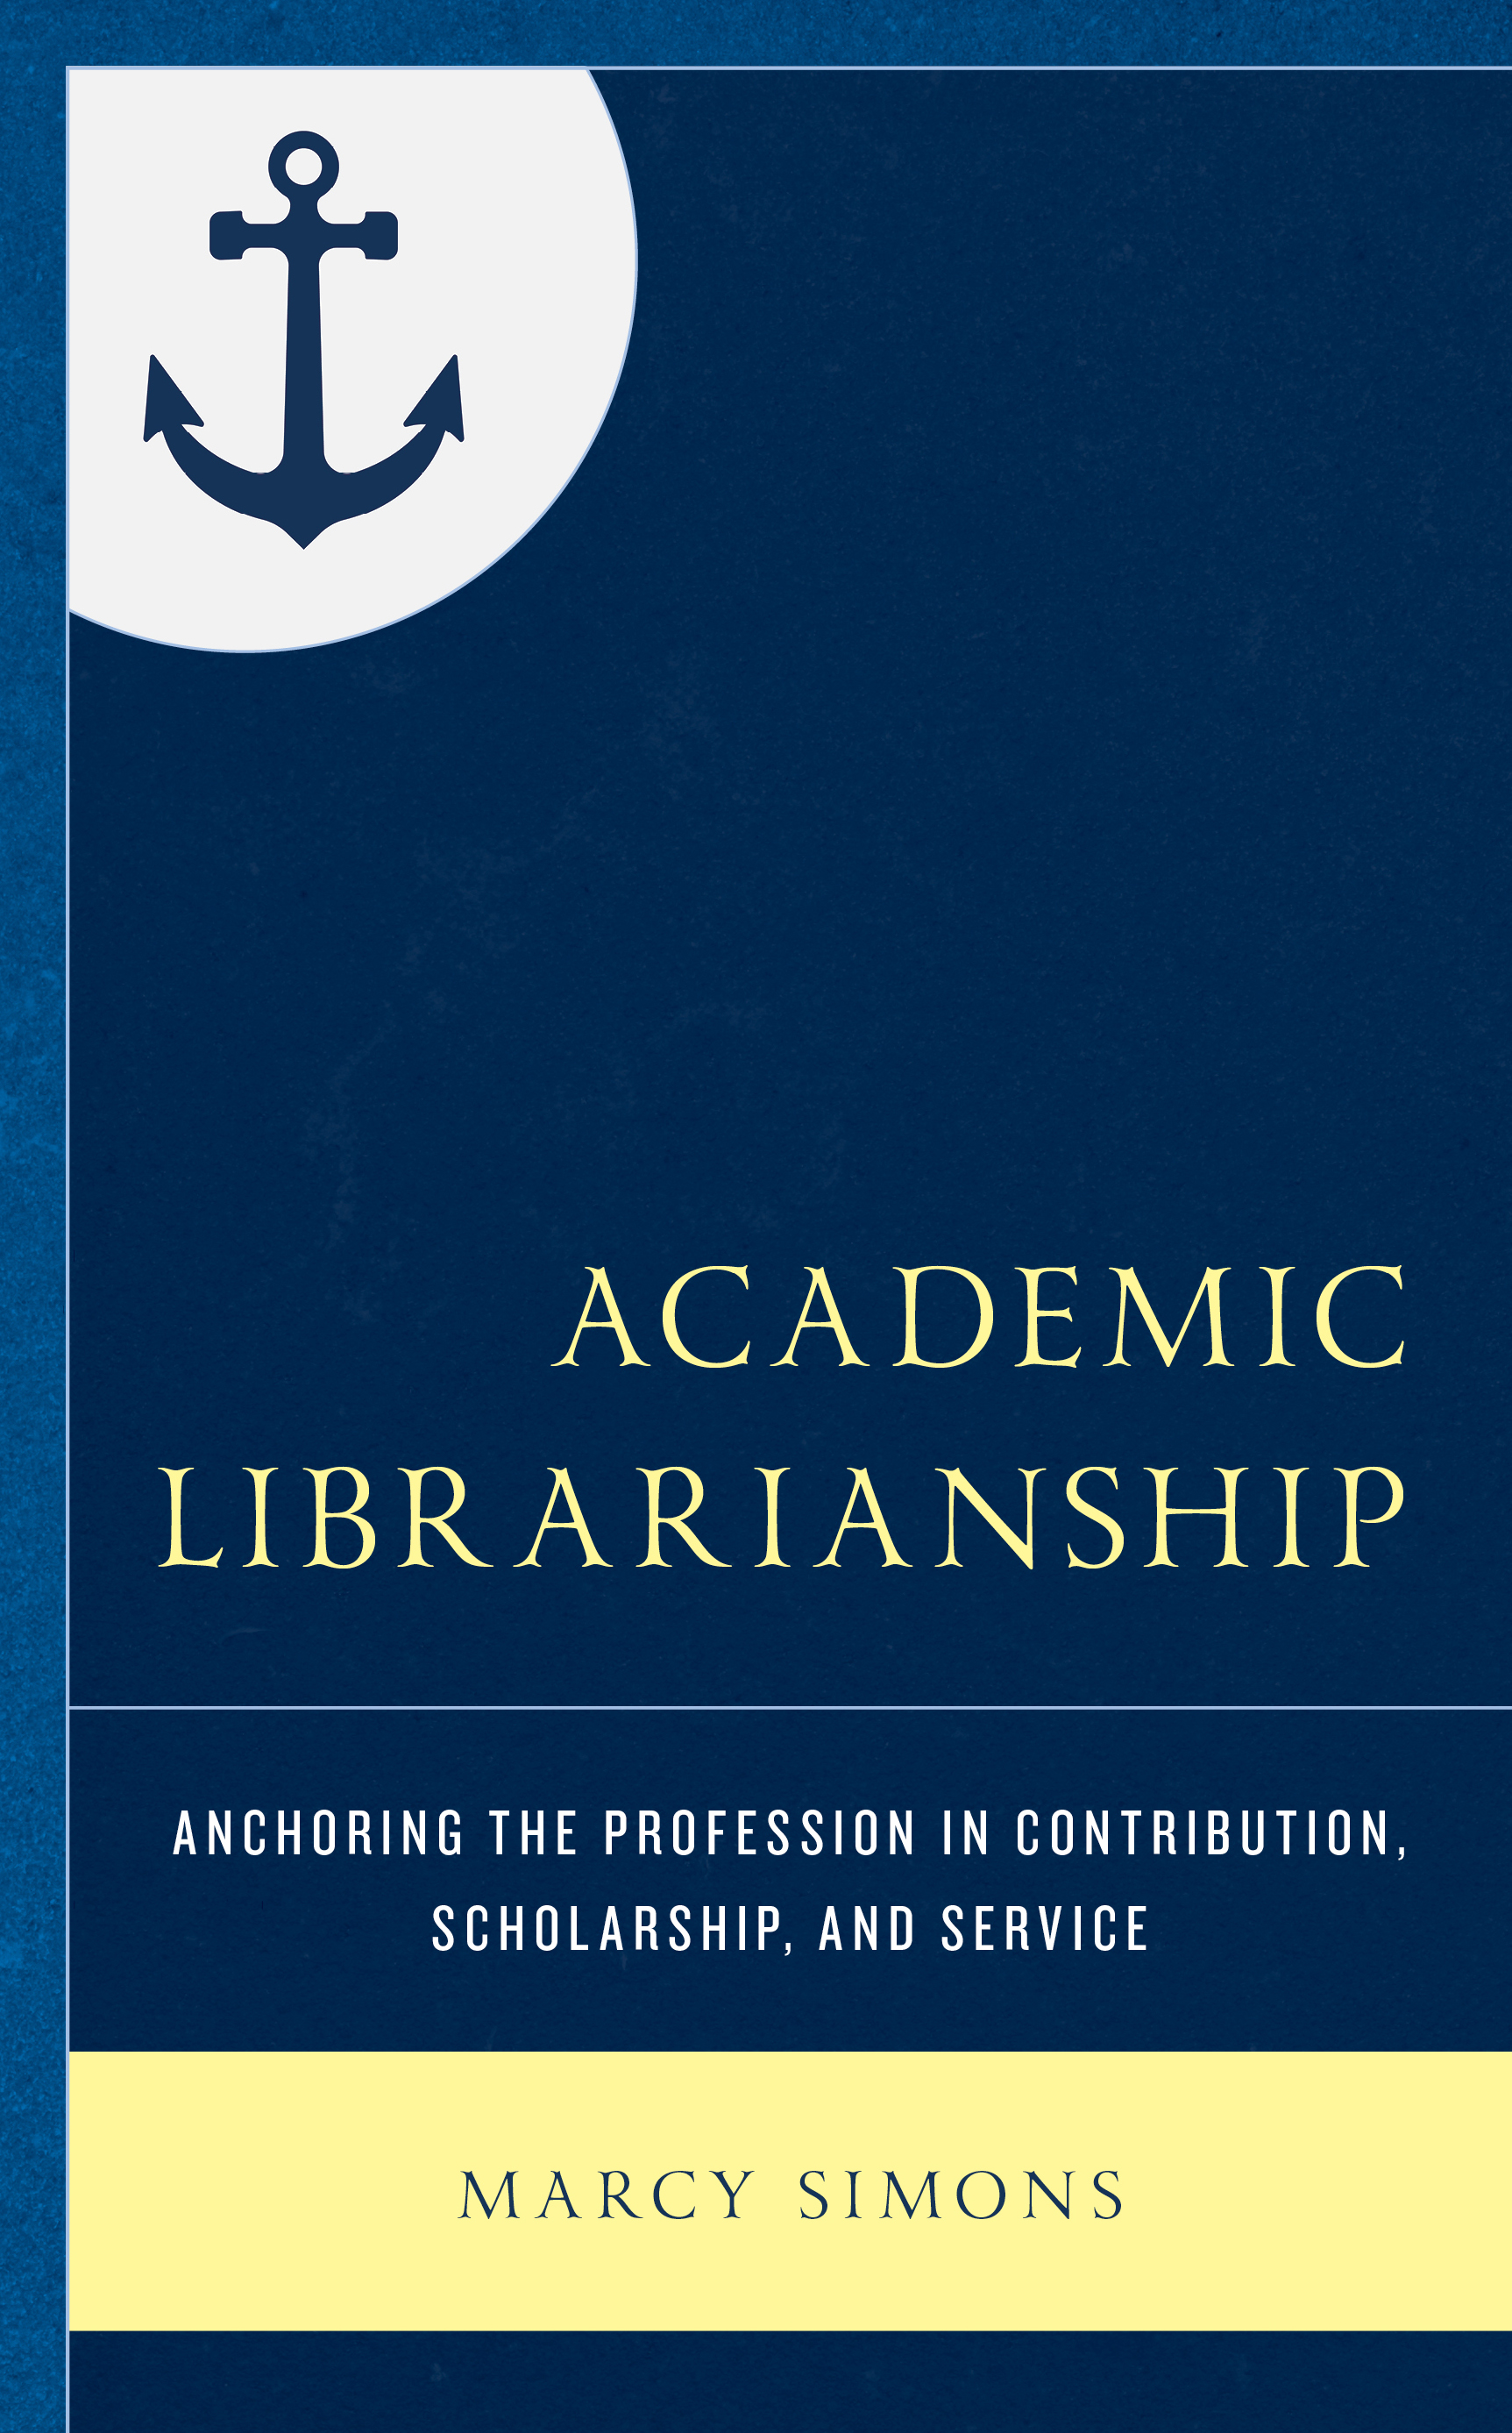 Academic Librarianship: Anchoring the Profession in Contribution, Scholarship, and Service